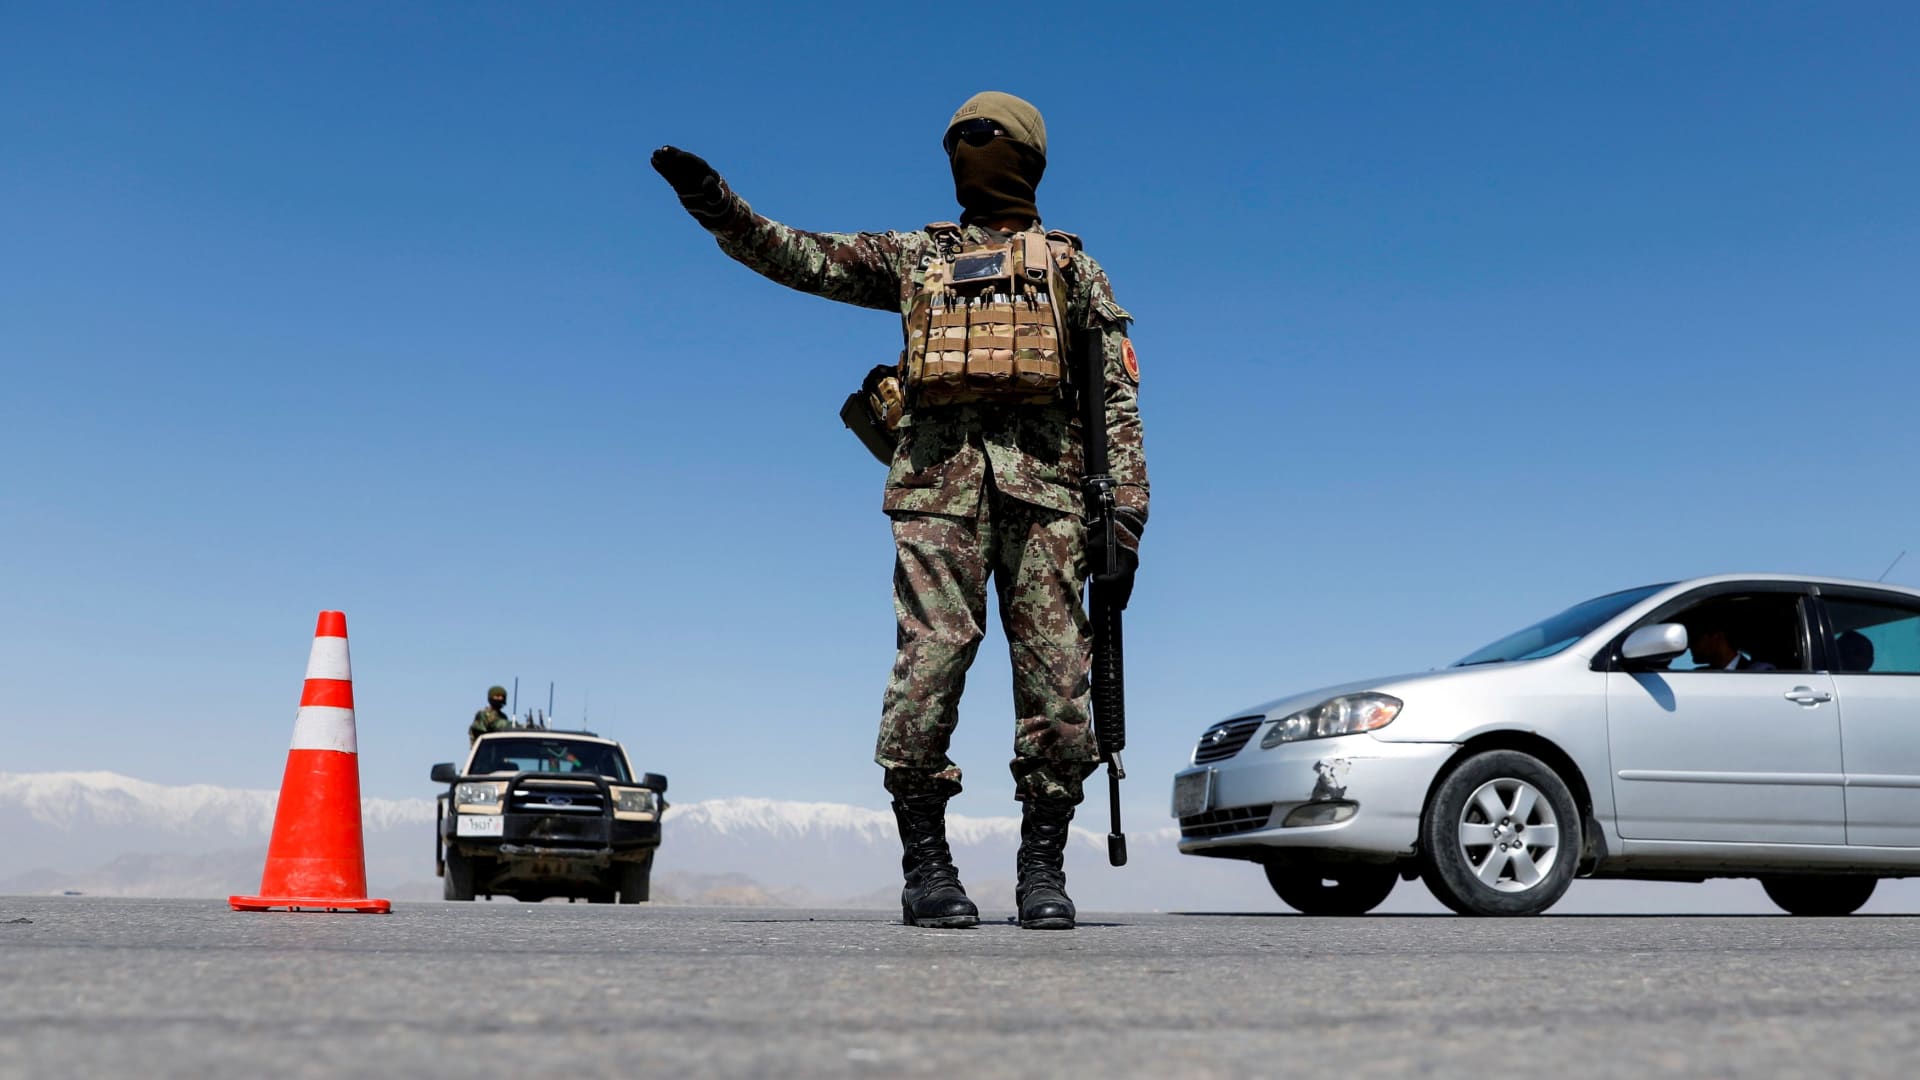 An Afghan National Army soldier stands guard at a checkpoint on the outskirts of Kabul, Afghanistan April 21, 2021.